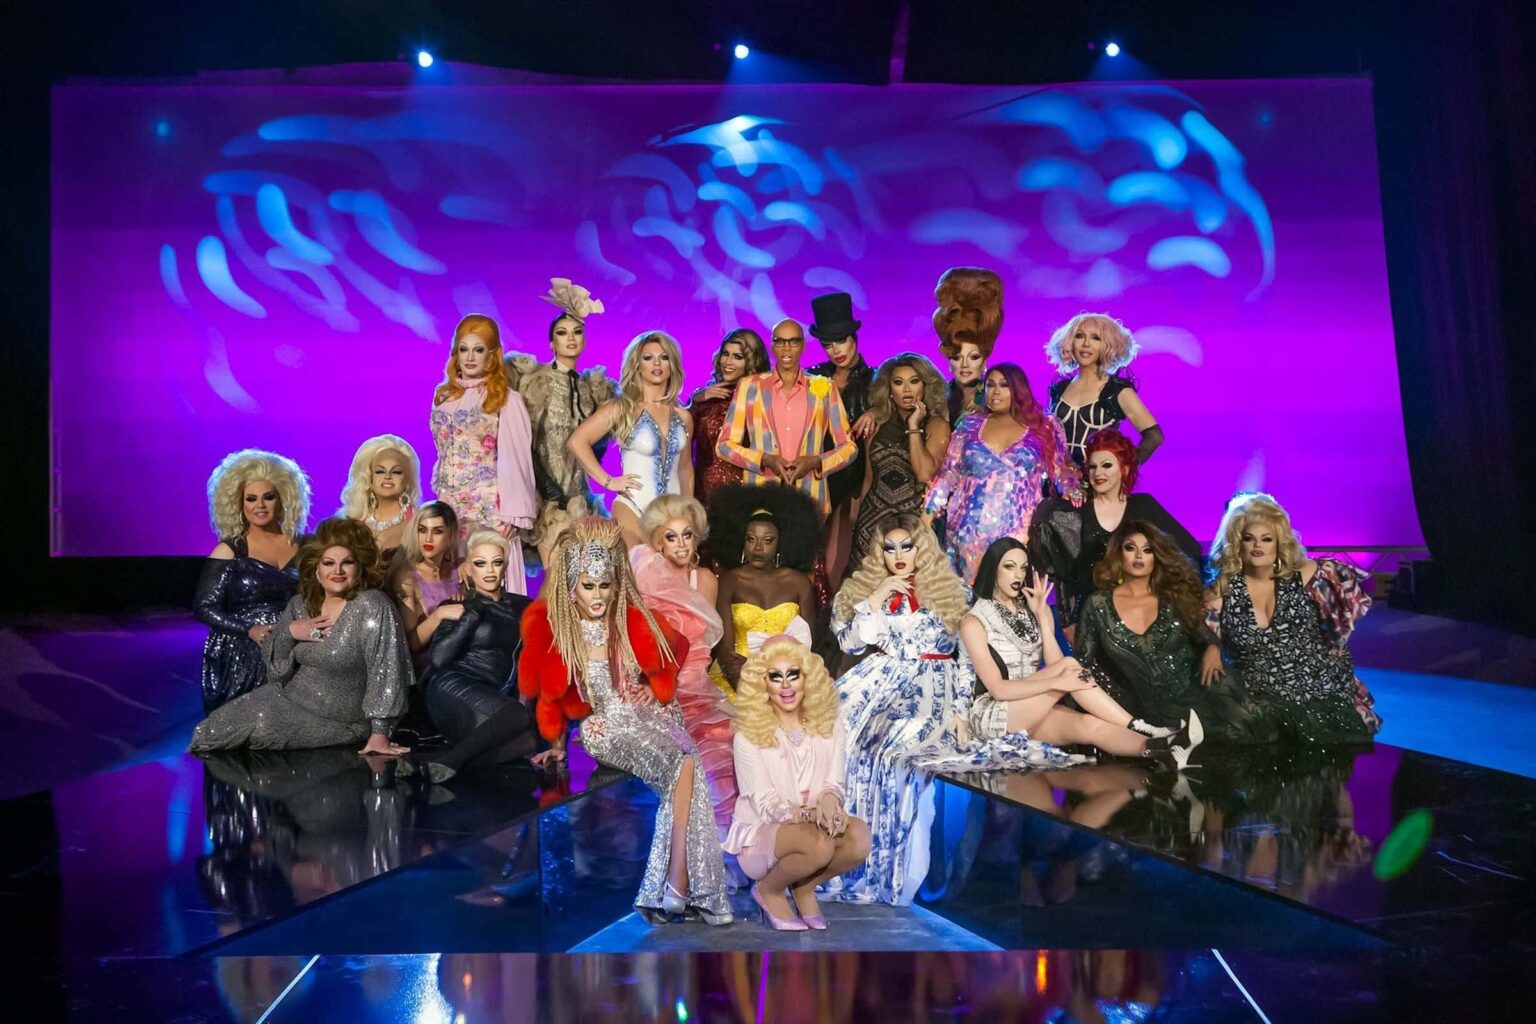 The word is out! 'RuPaul’s Drag Race' will sashay down the runway for another season. You better werk and find out what's happening with season 13.